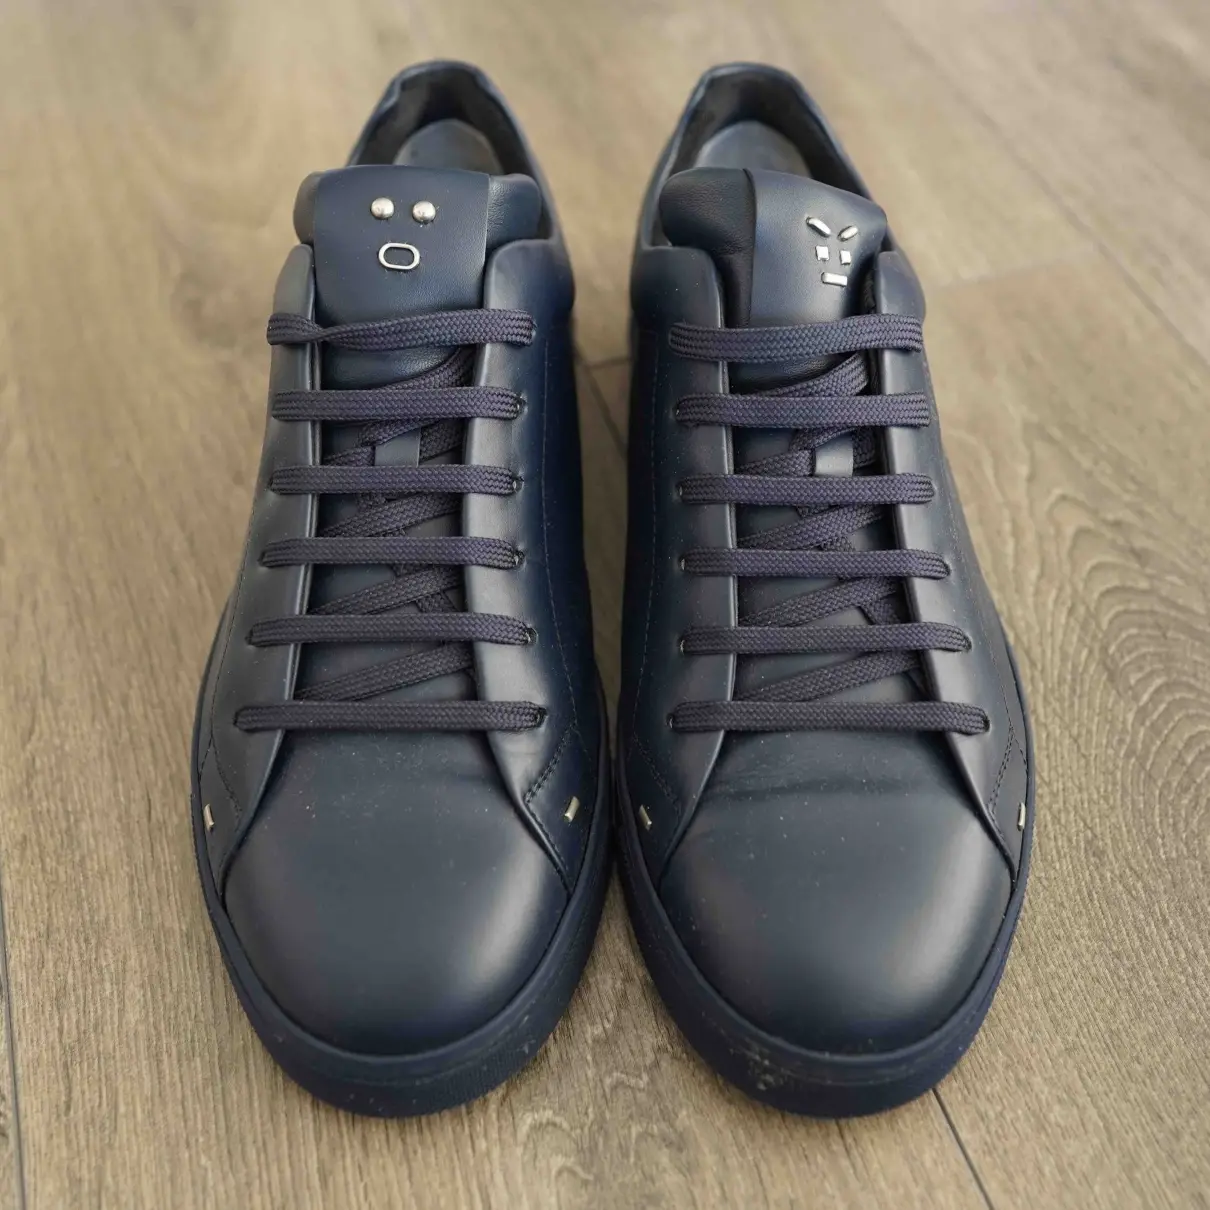 Buy Fendi Leather low trainers online